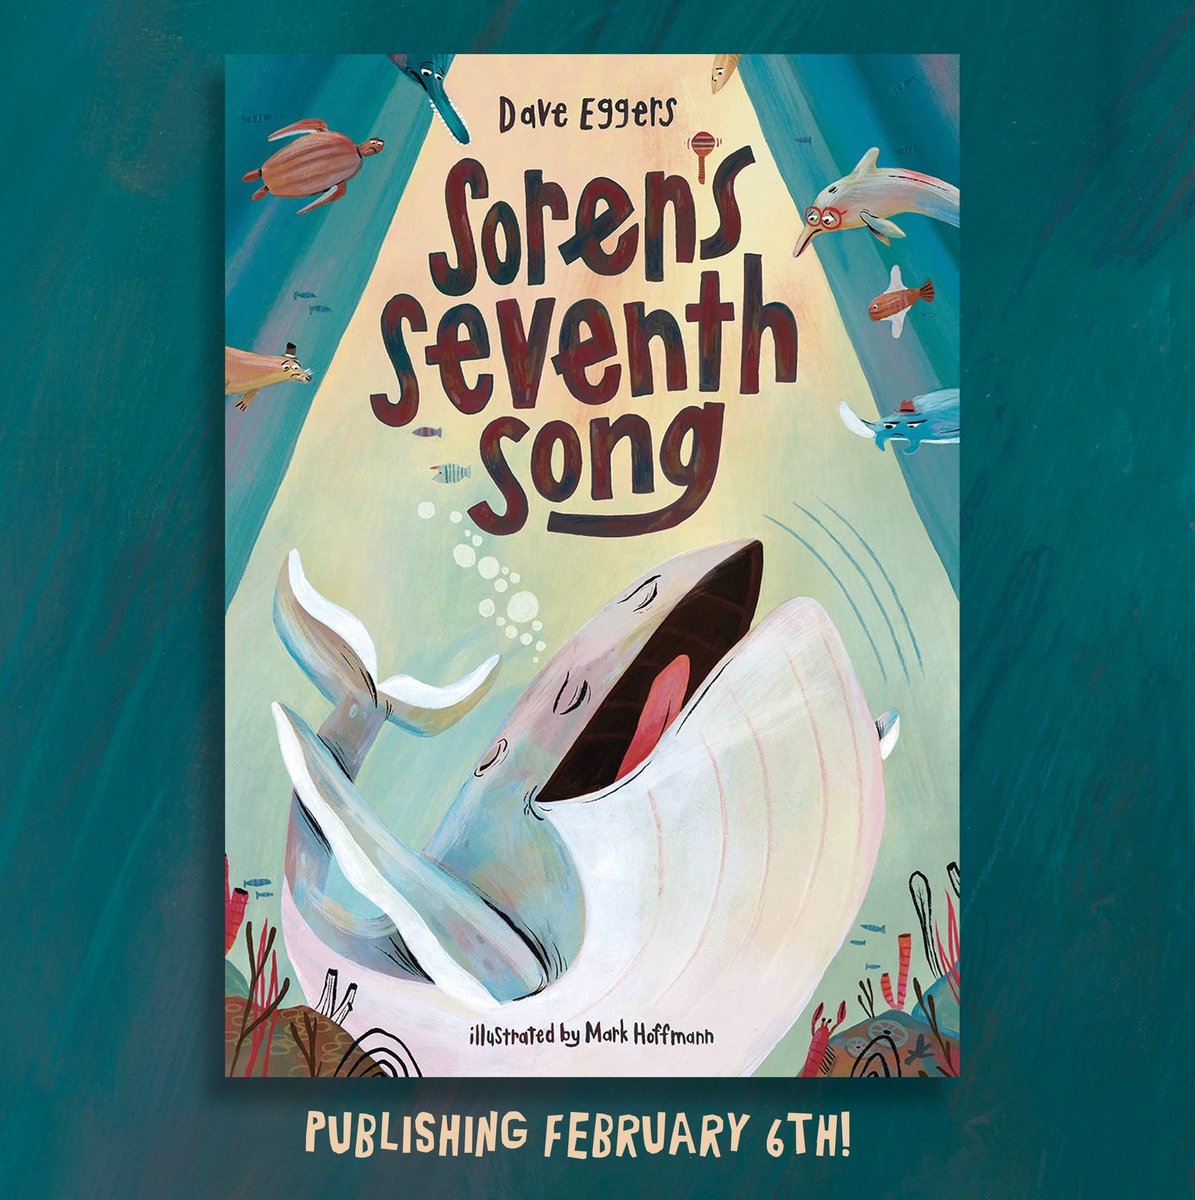 2/2
From Pulitzer Prize finalist & New York Times bestselling author #DaveEggers, Soren’s Seventh Song is a deadpan take on creativity & persistence, as told through the eyes of a humpback whale looking for a new song—with color illustrations by Mark Hoffmann 

#newkidlit #kidlit